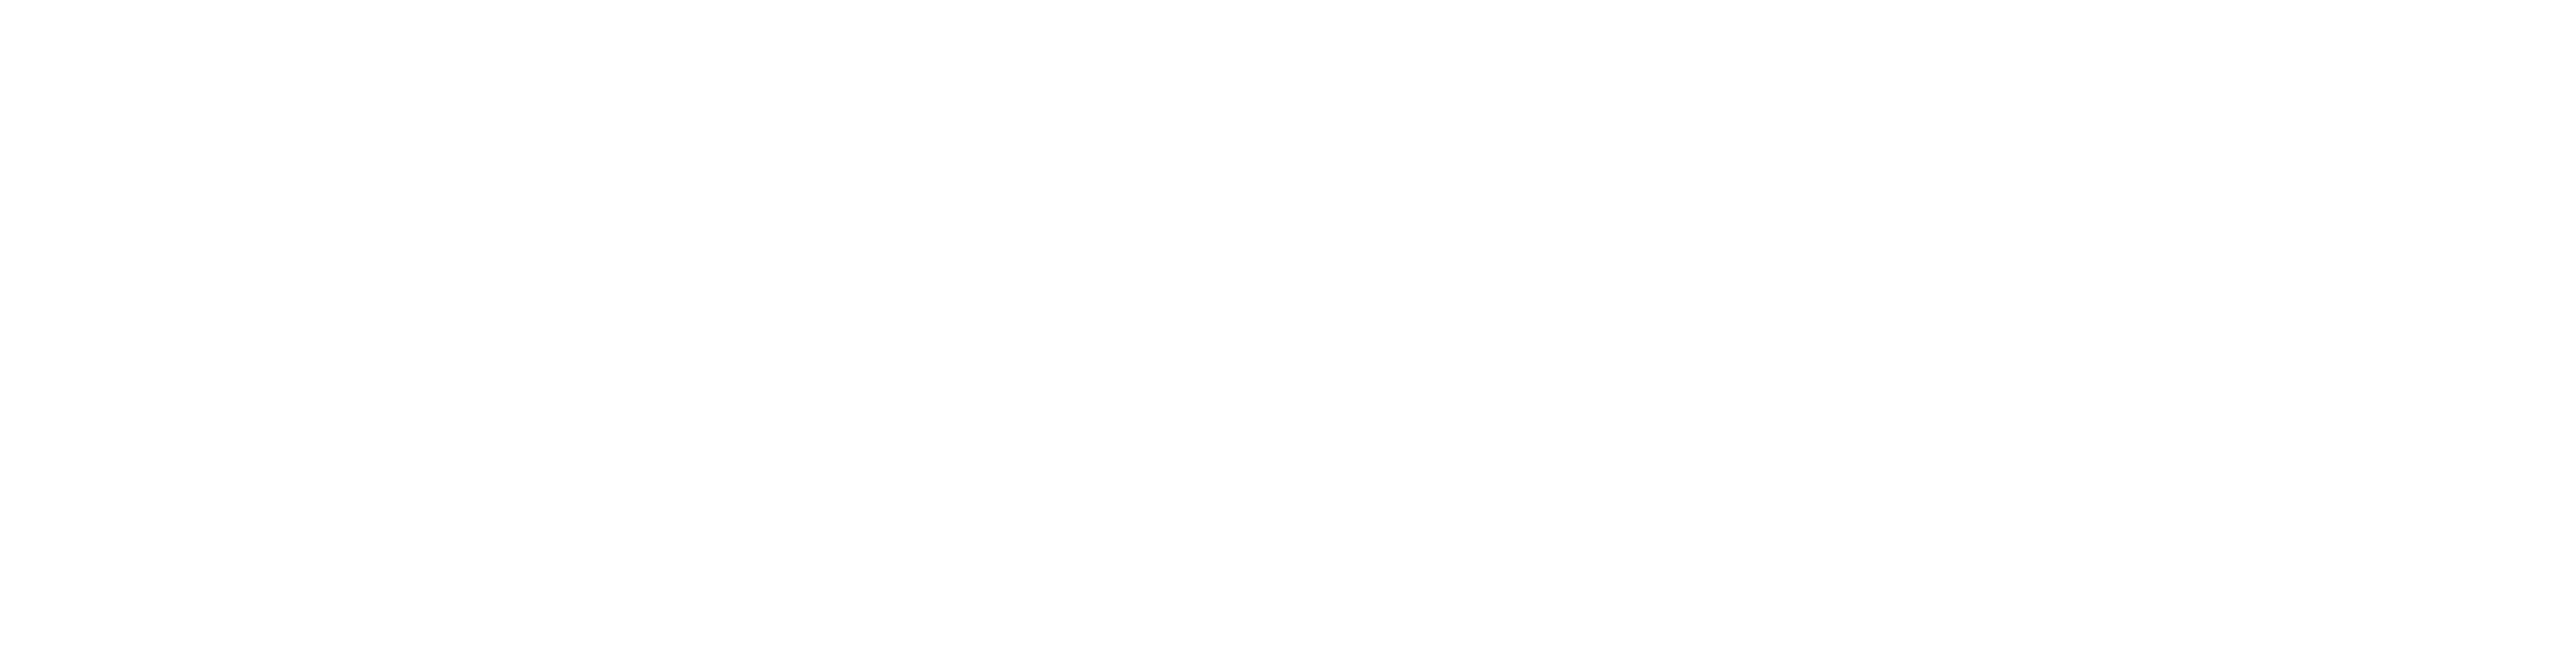 Proptech_01 (1)